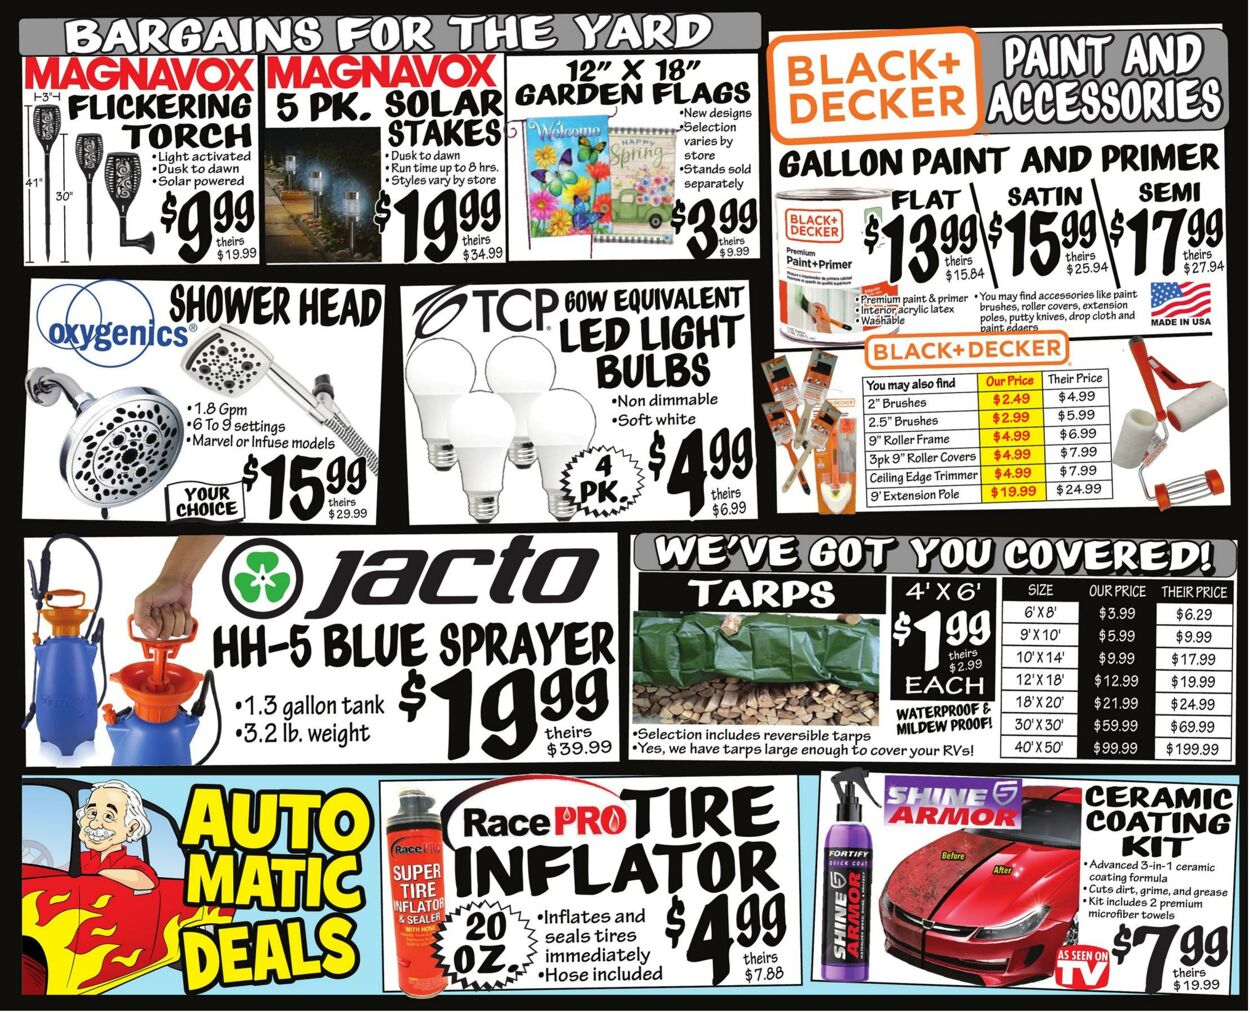 Weekly ad Ollie's 03/16/2023 - 03/22/2023